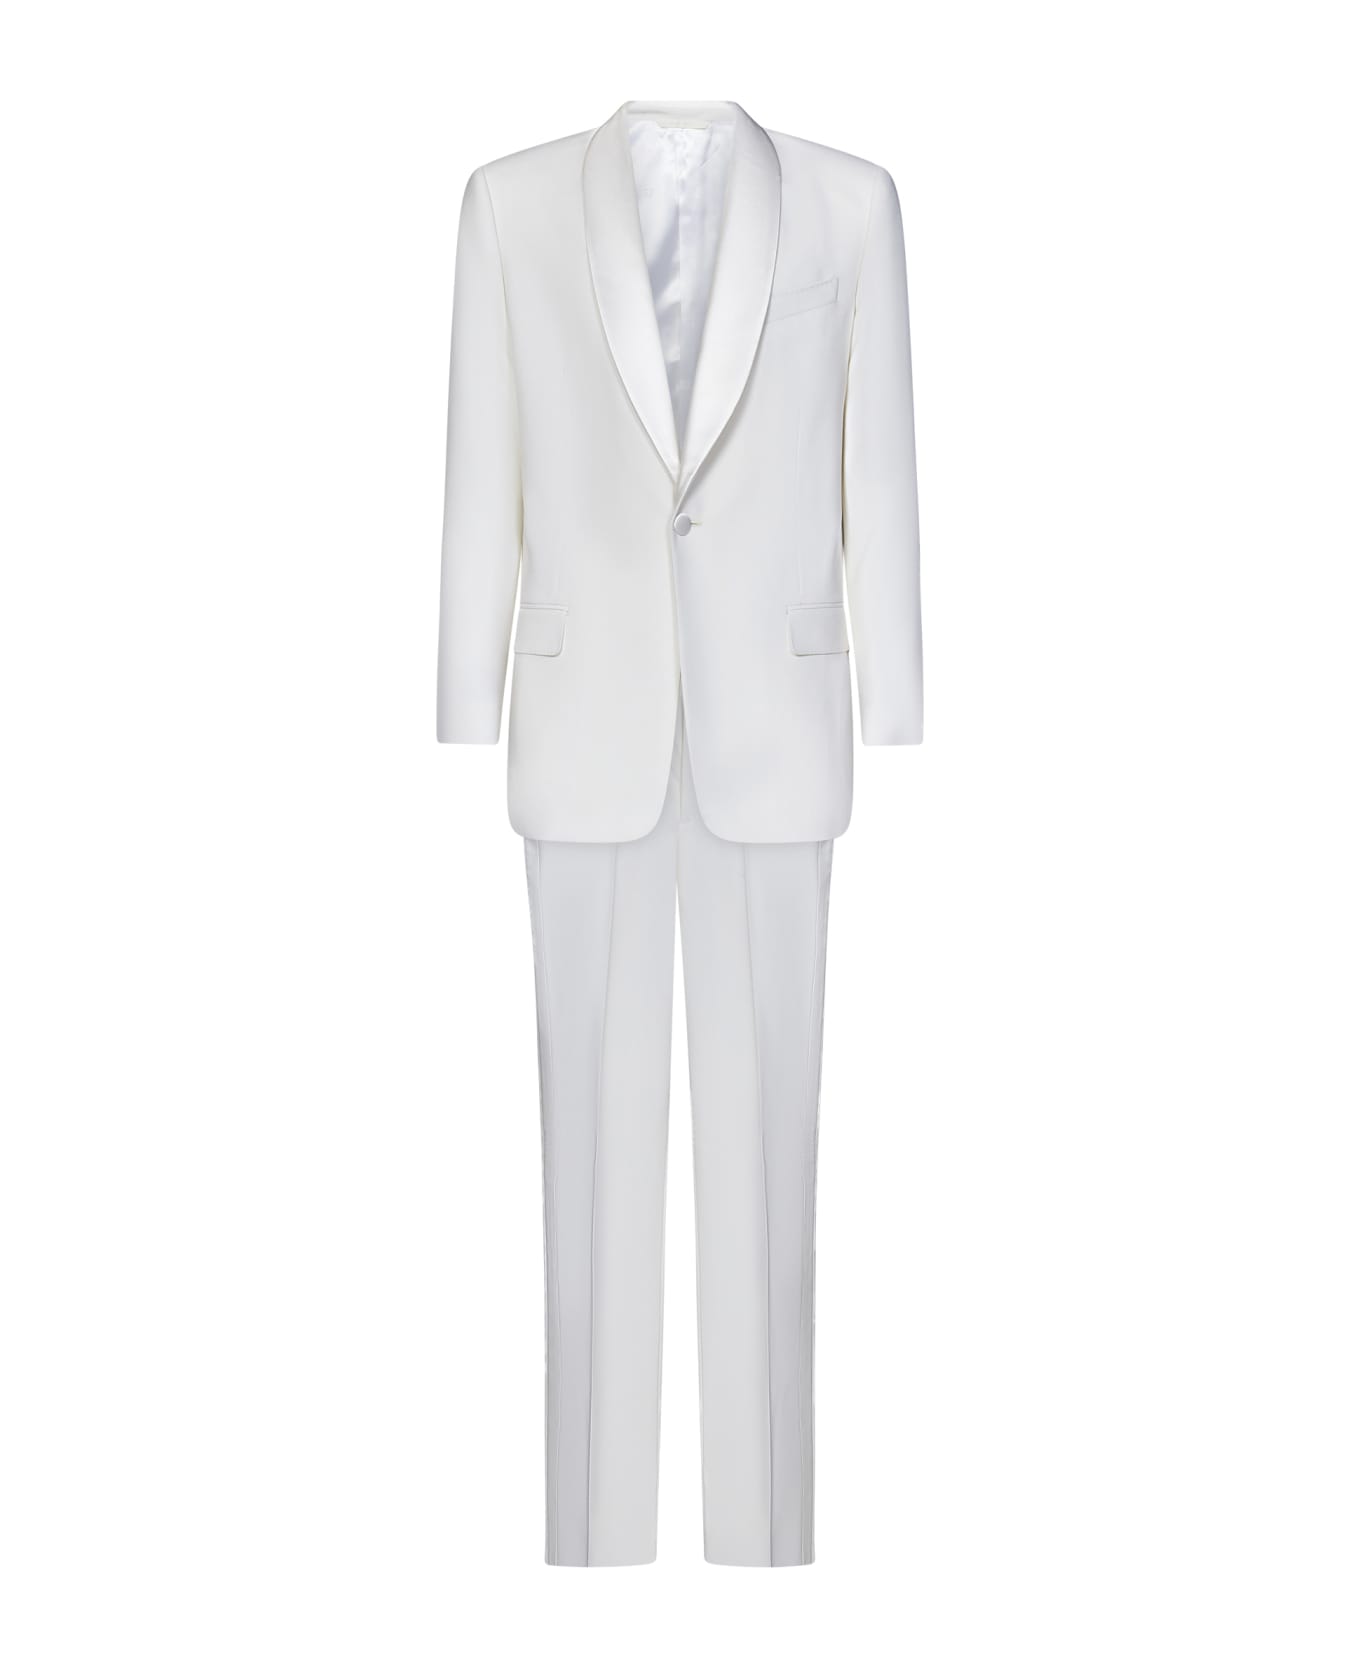 Givenchy Suit - White スーツ